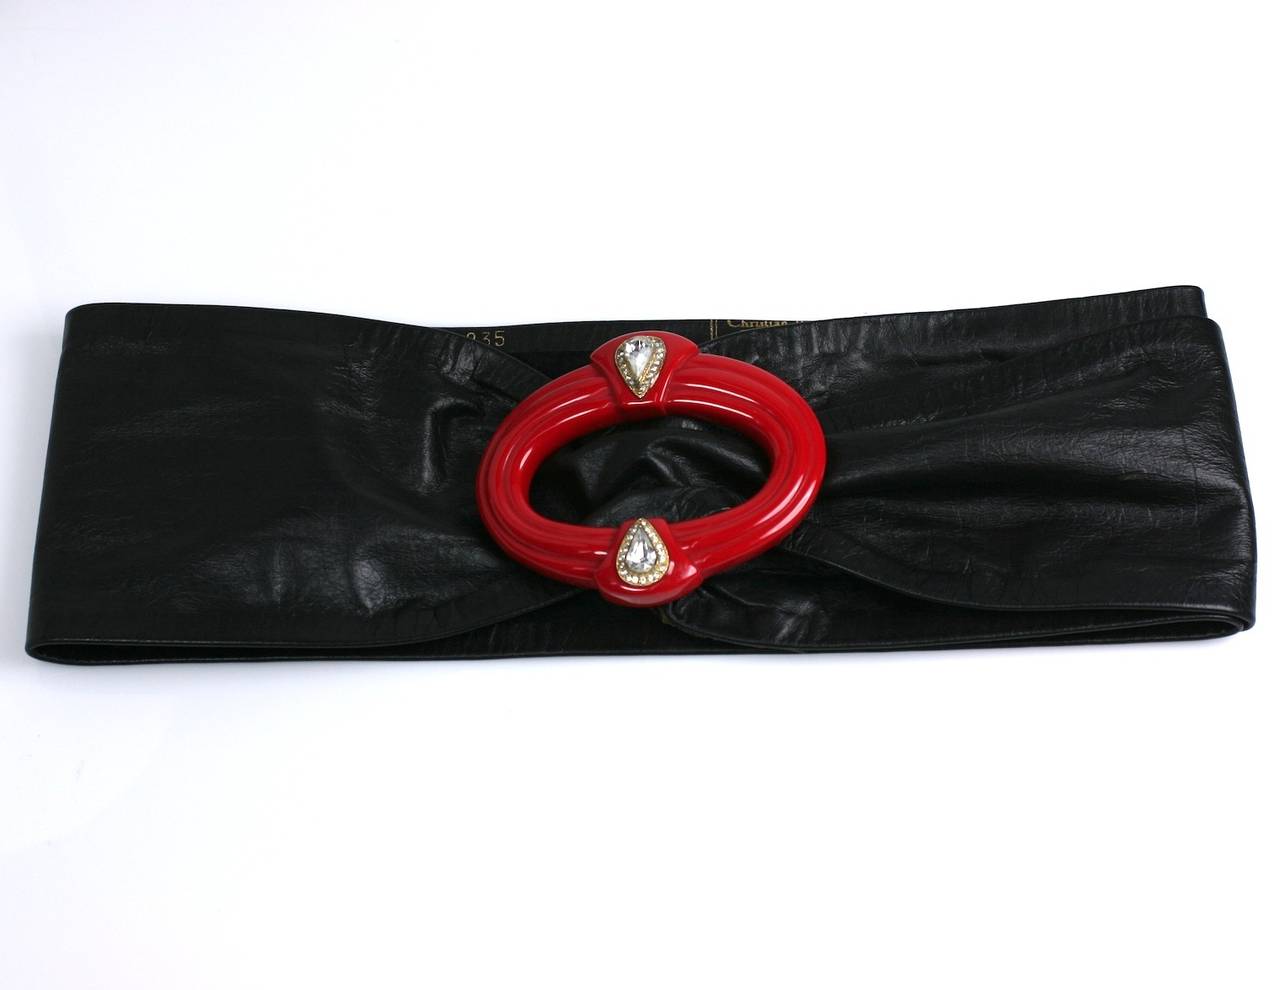 Christian Dior Art Deco Revival belt of wide, soft black leather with rhinestone decorated, carved red bakelite buckle. Fully adjustable, no size. 1980's France.
Excellent condition. Leather part 36